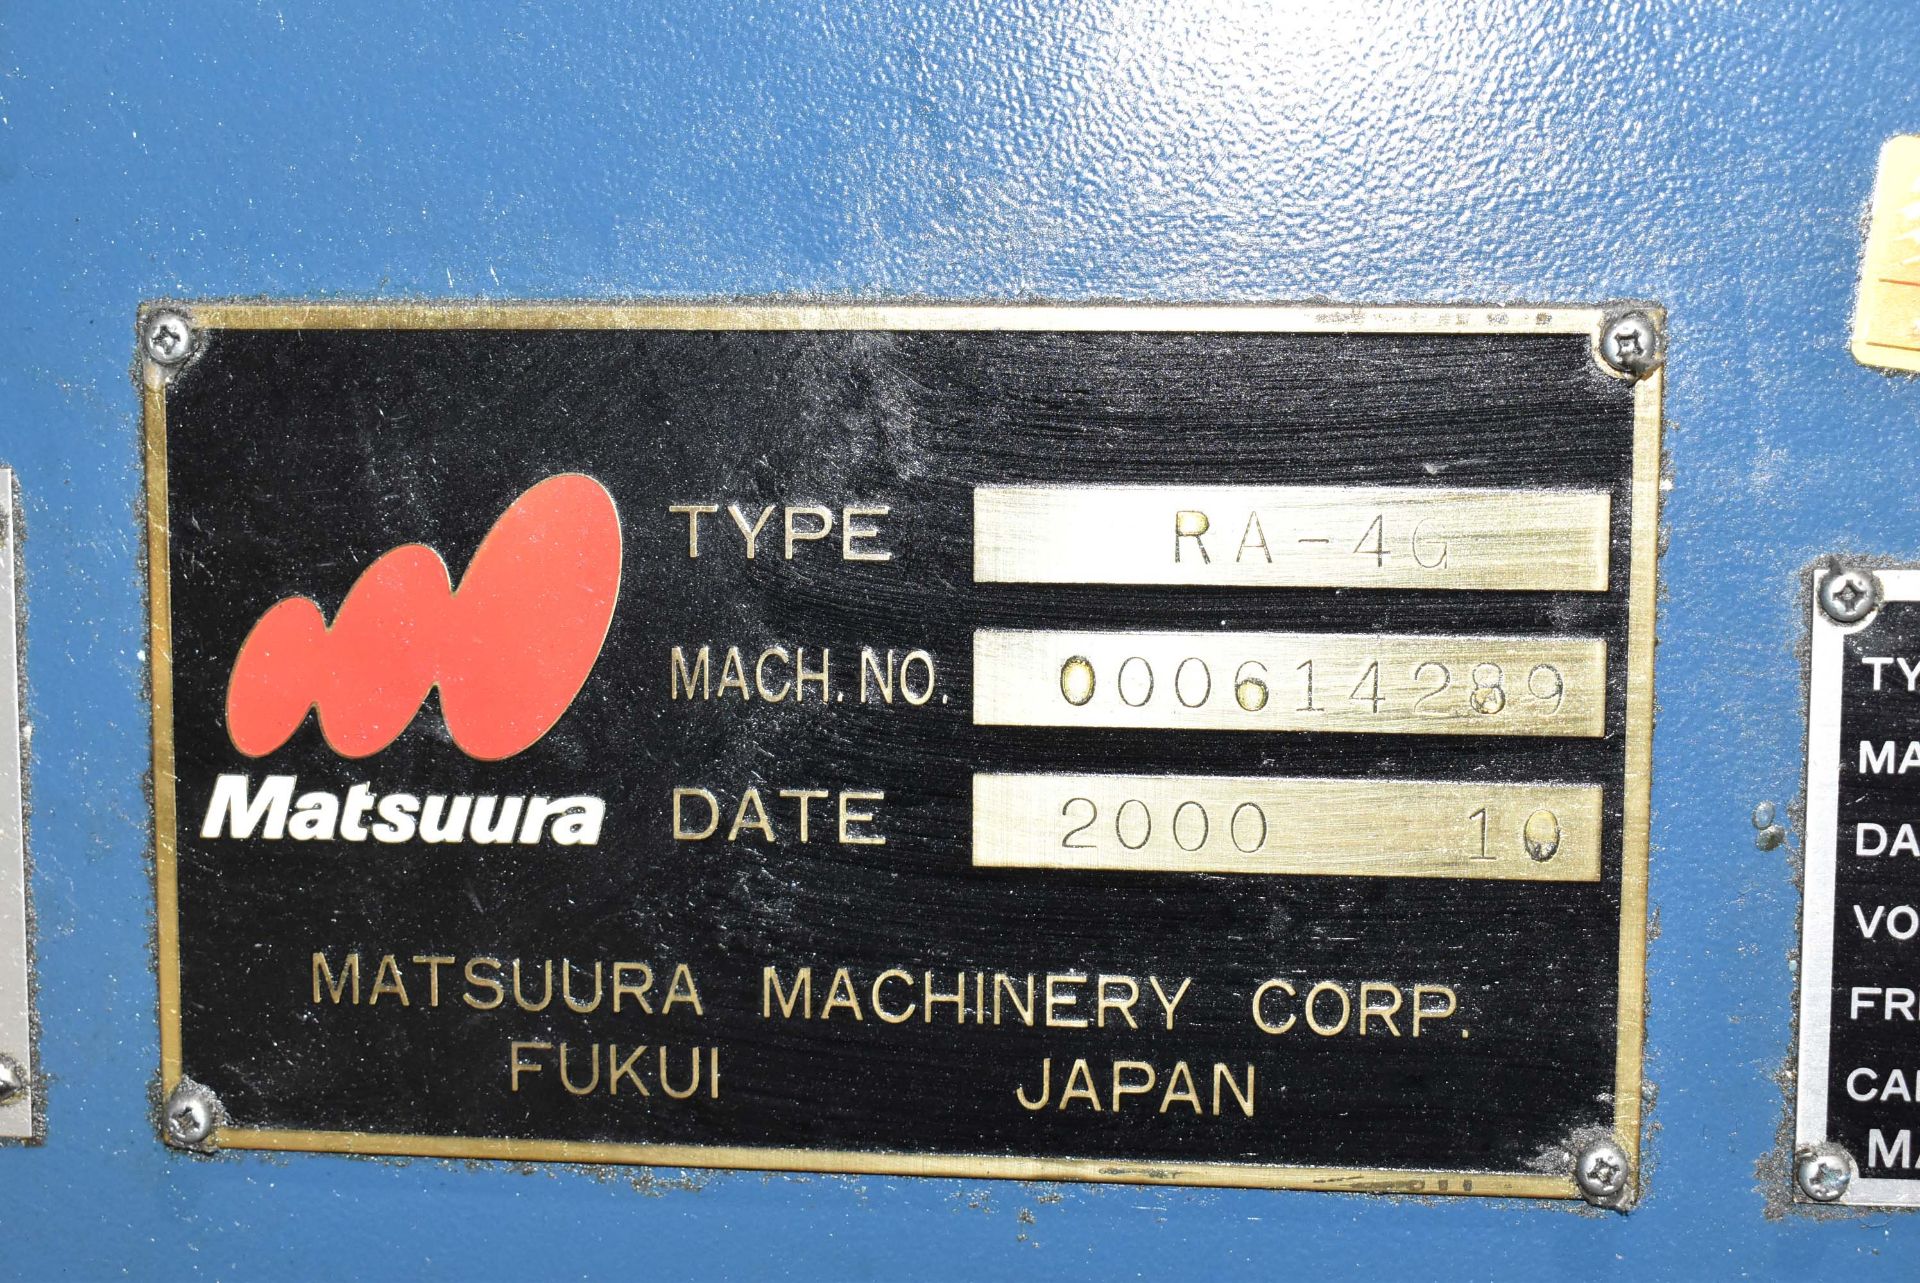 MATSUURA (2000) RA-4G TWIN-PALLET HIGH-SPEED CNC VERTICAL MACHINING CENTER WITH YASNAC CNC - Image 11 of 12